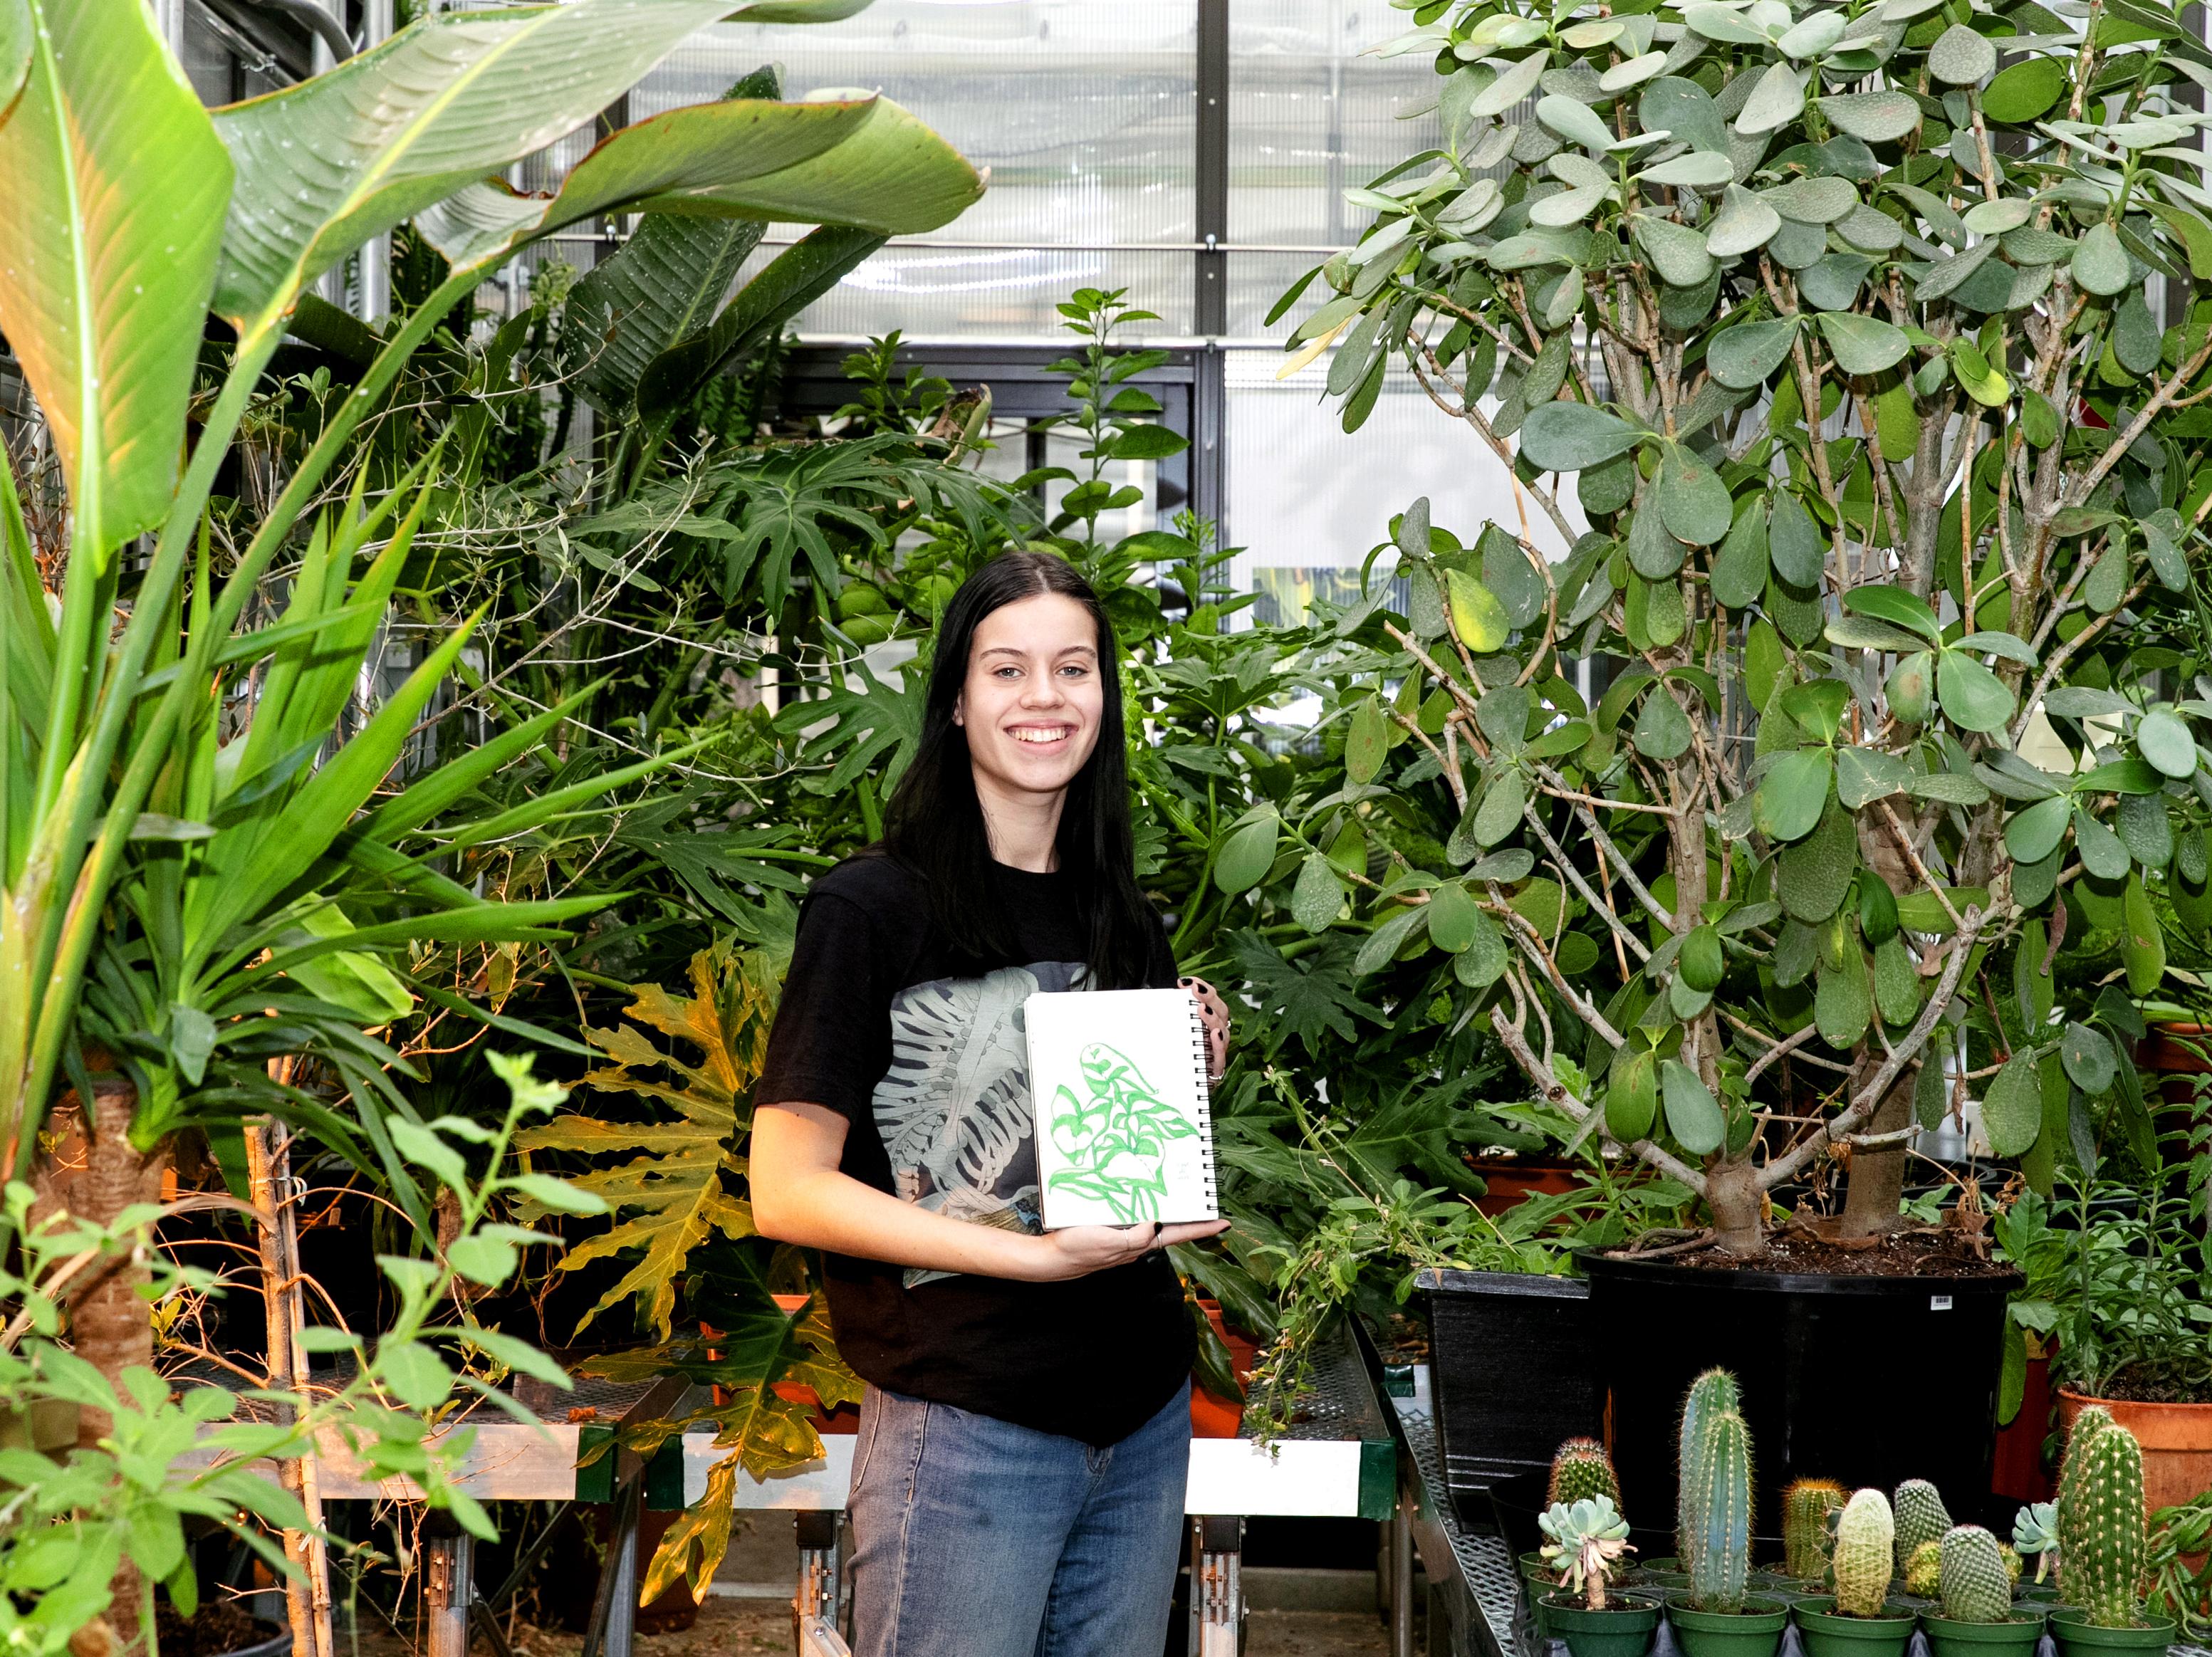 Biology and studio art double major Allison Conwell ’25, who plans to pursue a career in scientific illustration, shows one of her illustrations during a visit to the Billie Tisch Center for Integrated Sciences greenhouse.